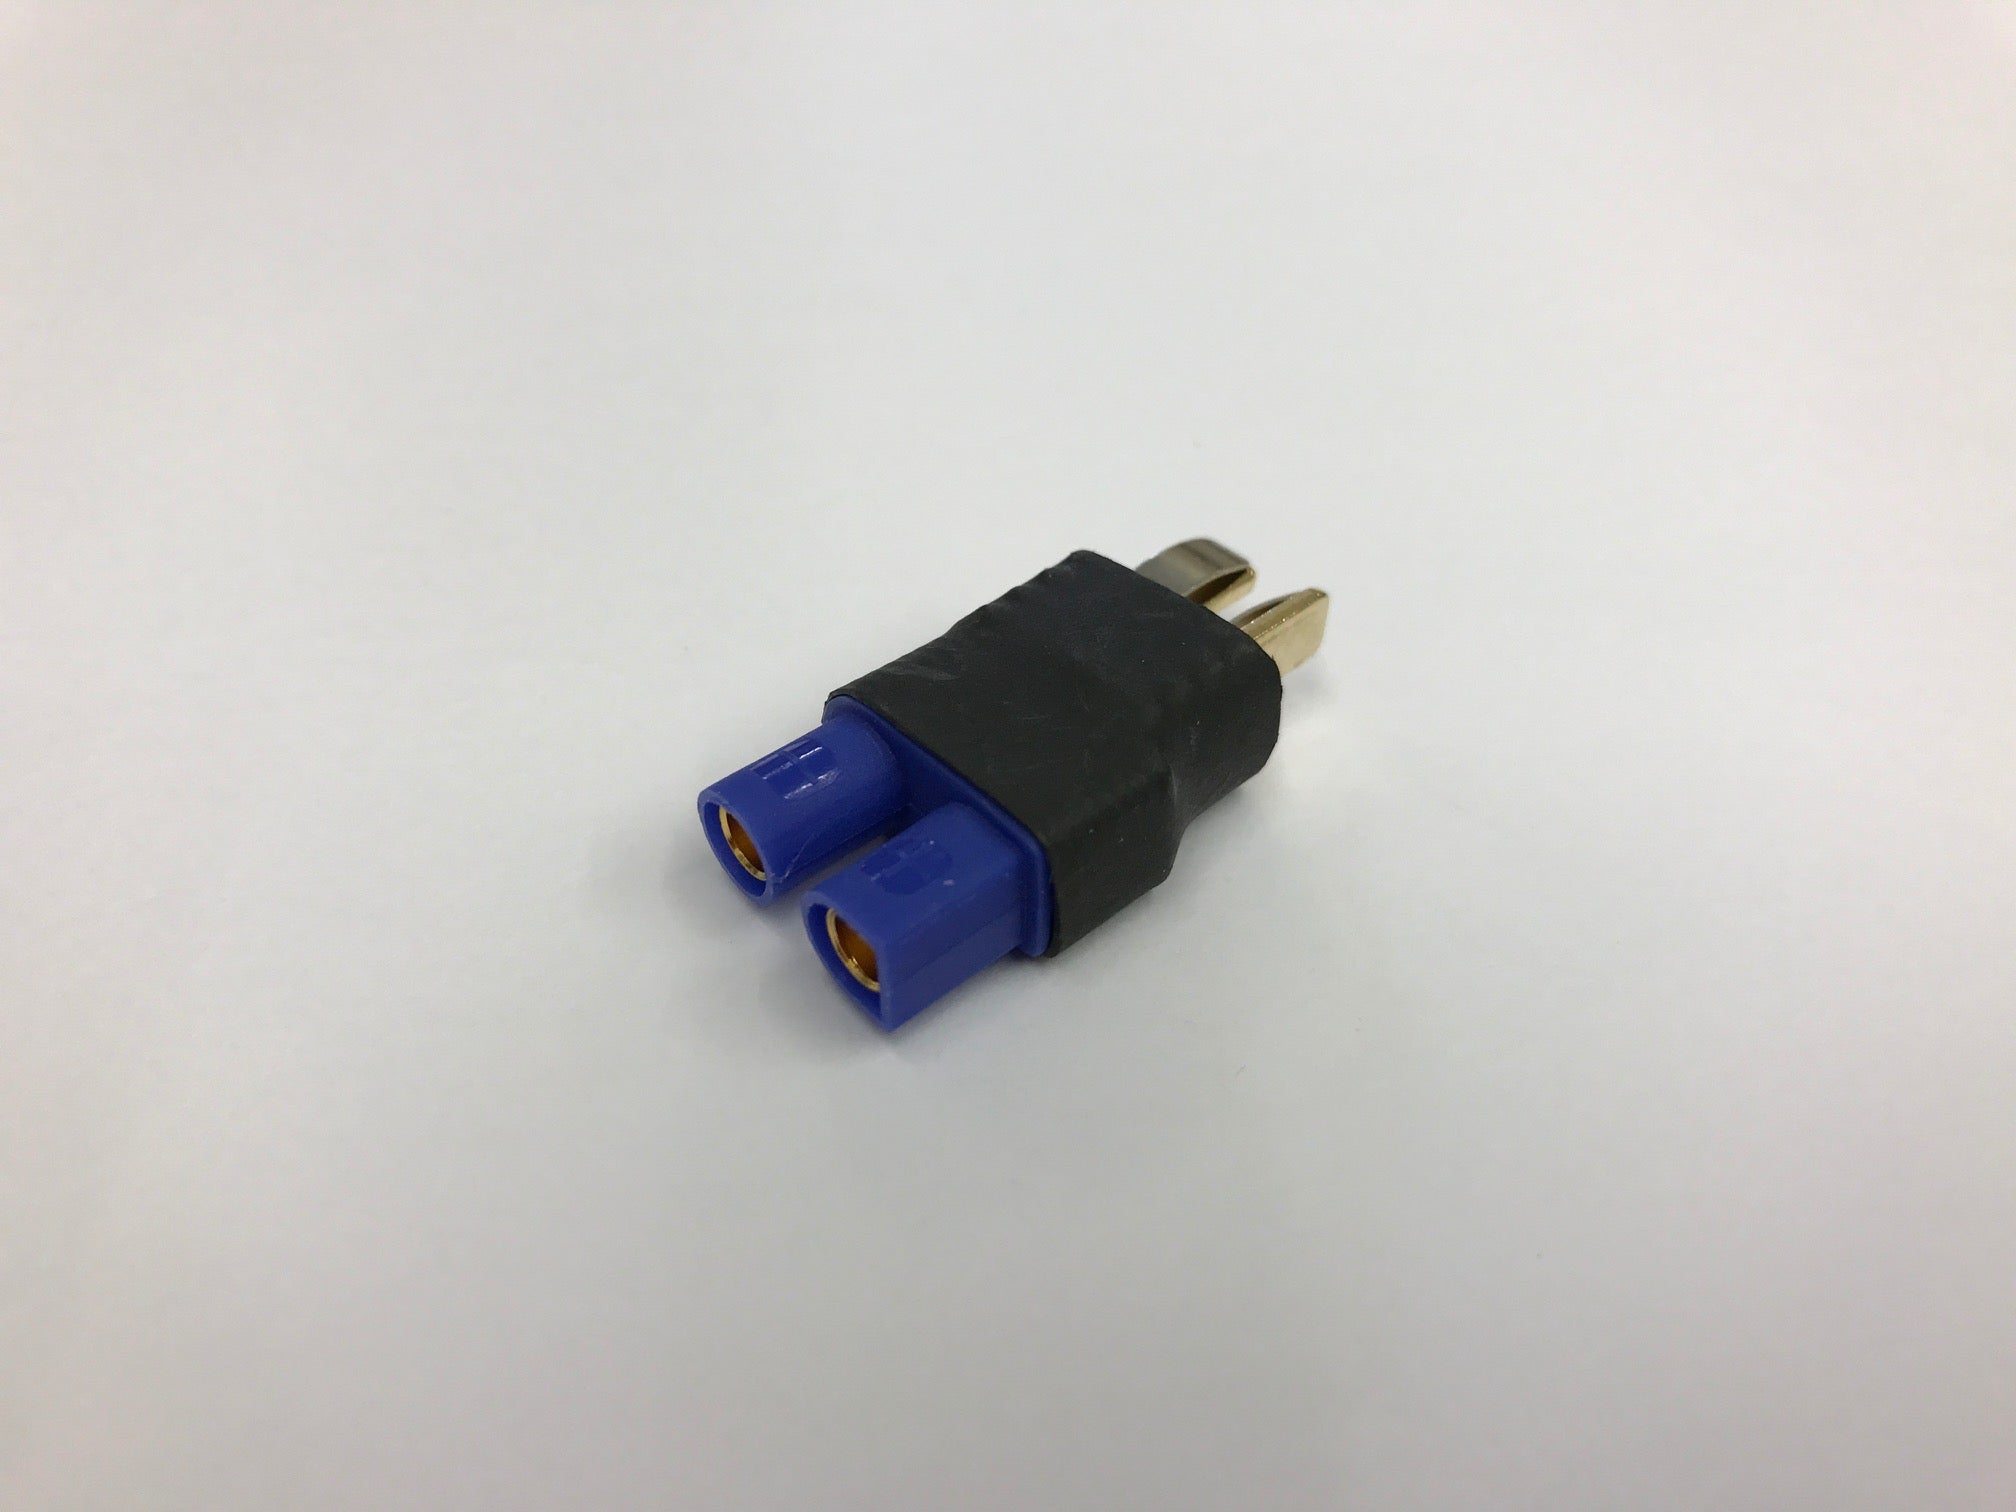 Deans Male - EC3 Female Compact Adapter